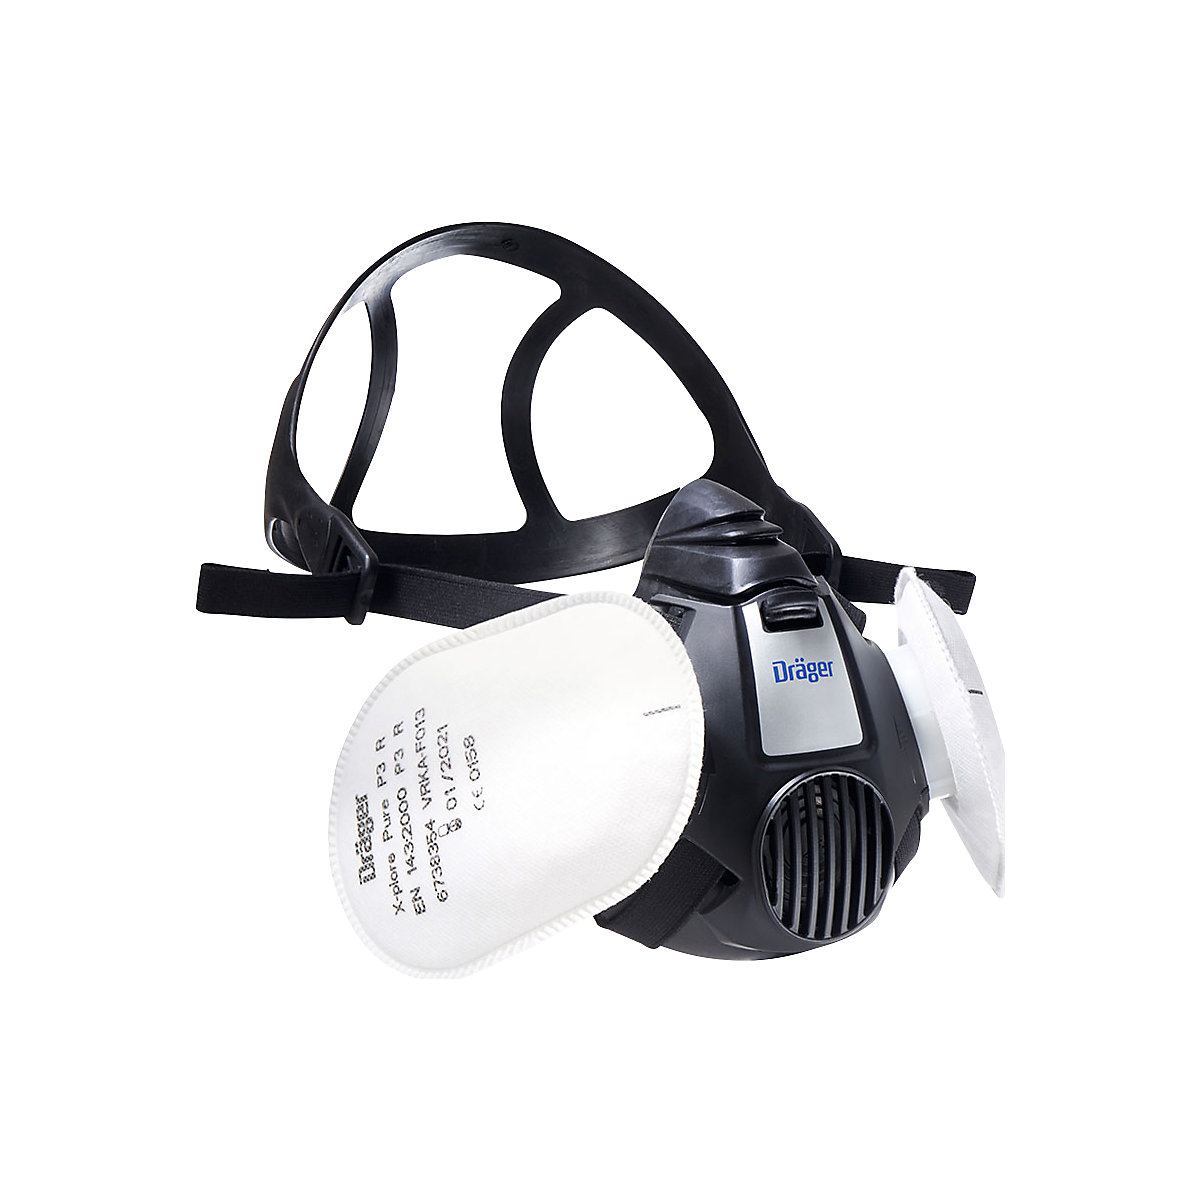 Set of X-plore® 3500 half masks for working with dust – Dräger